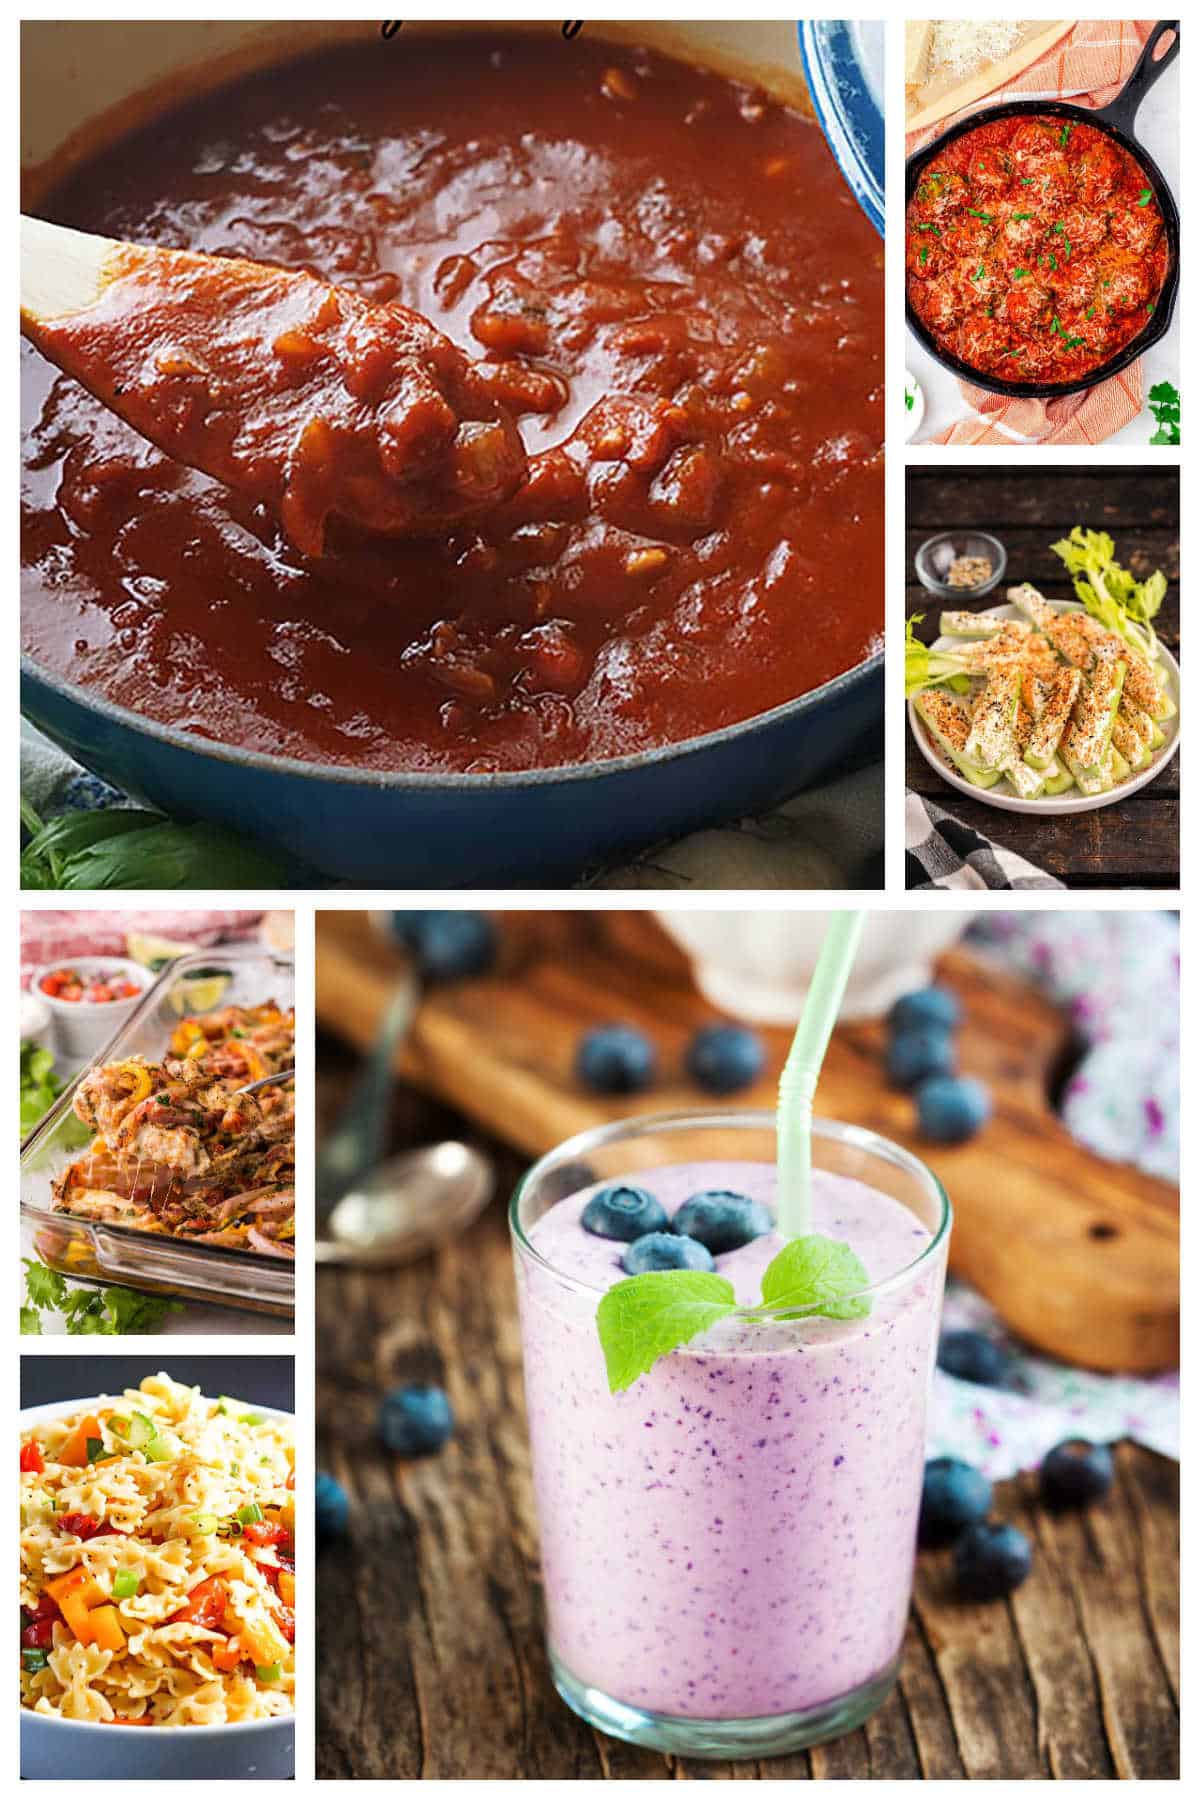 A collage of photos showing ways to incorporate more vegetables. In a smoothie, salads, casseroles, pasta sauces, meatballs and stuffed celery.